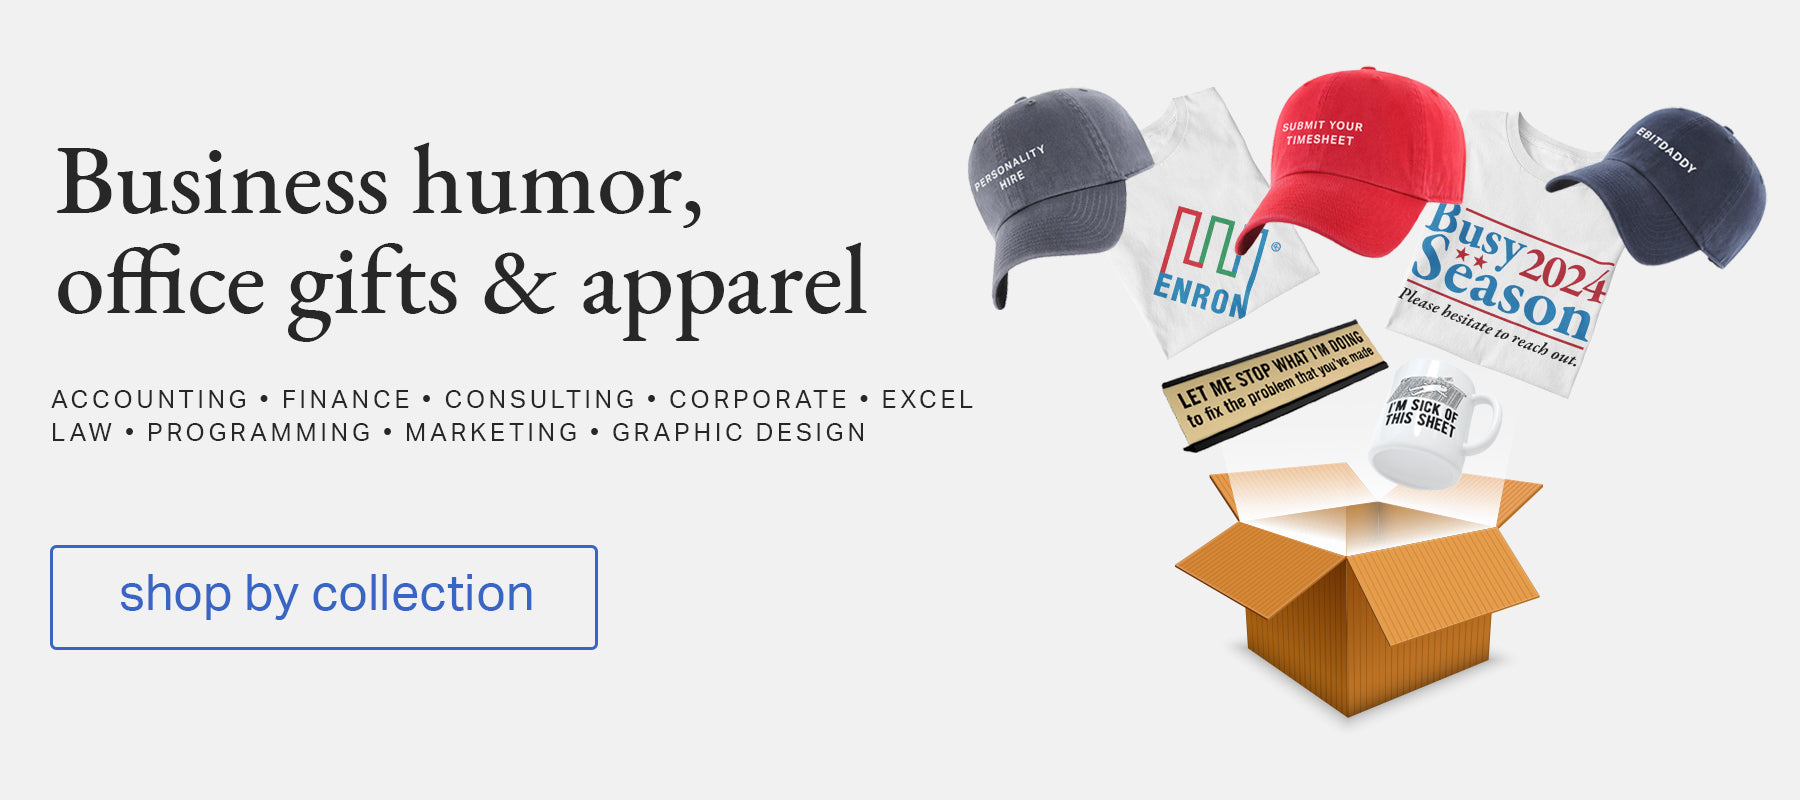 Business humor, office gifts and apparel